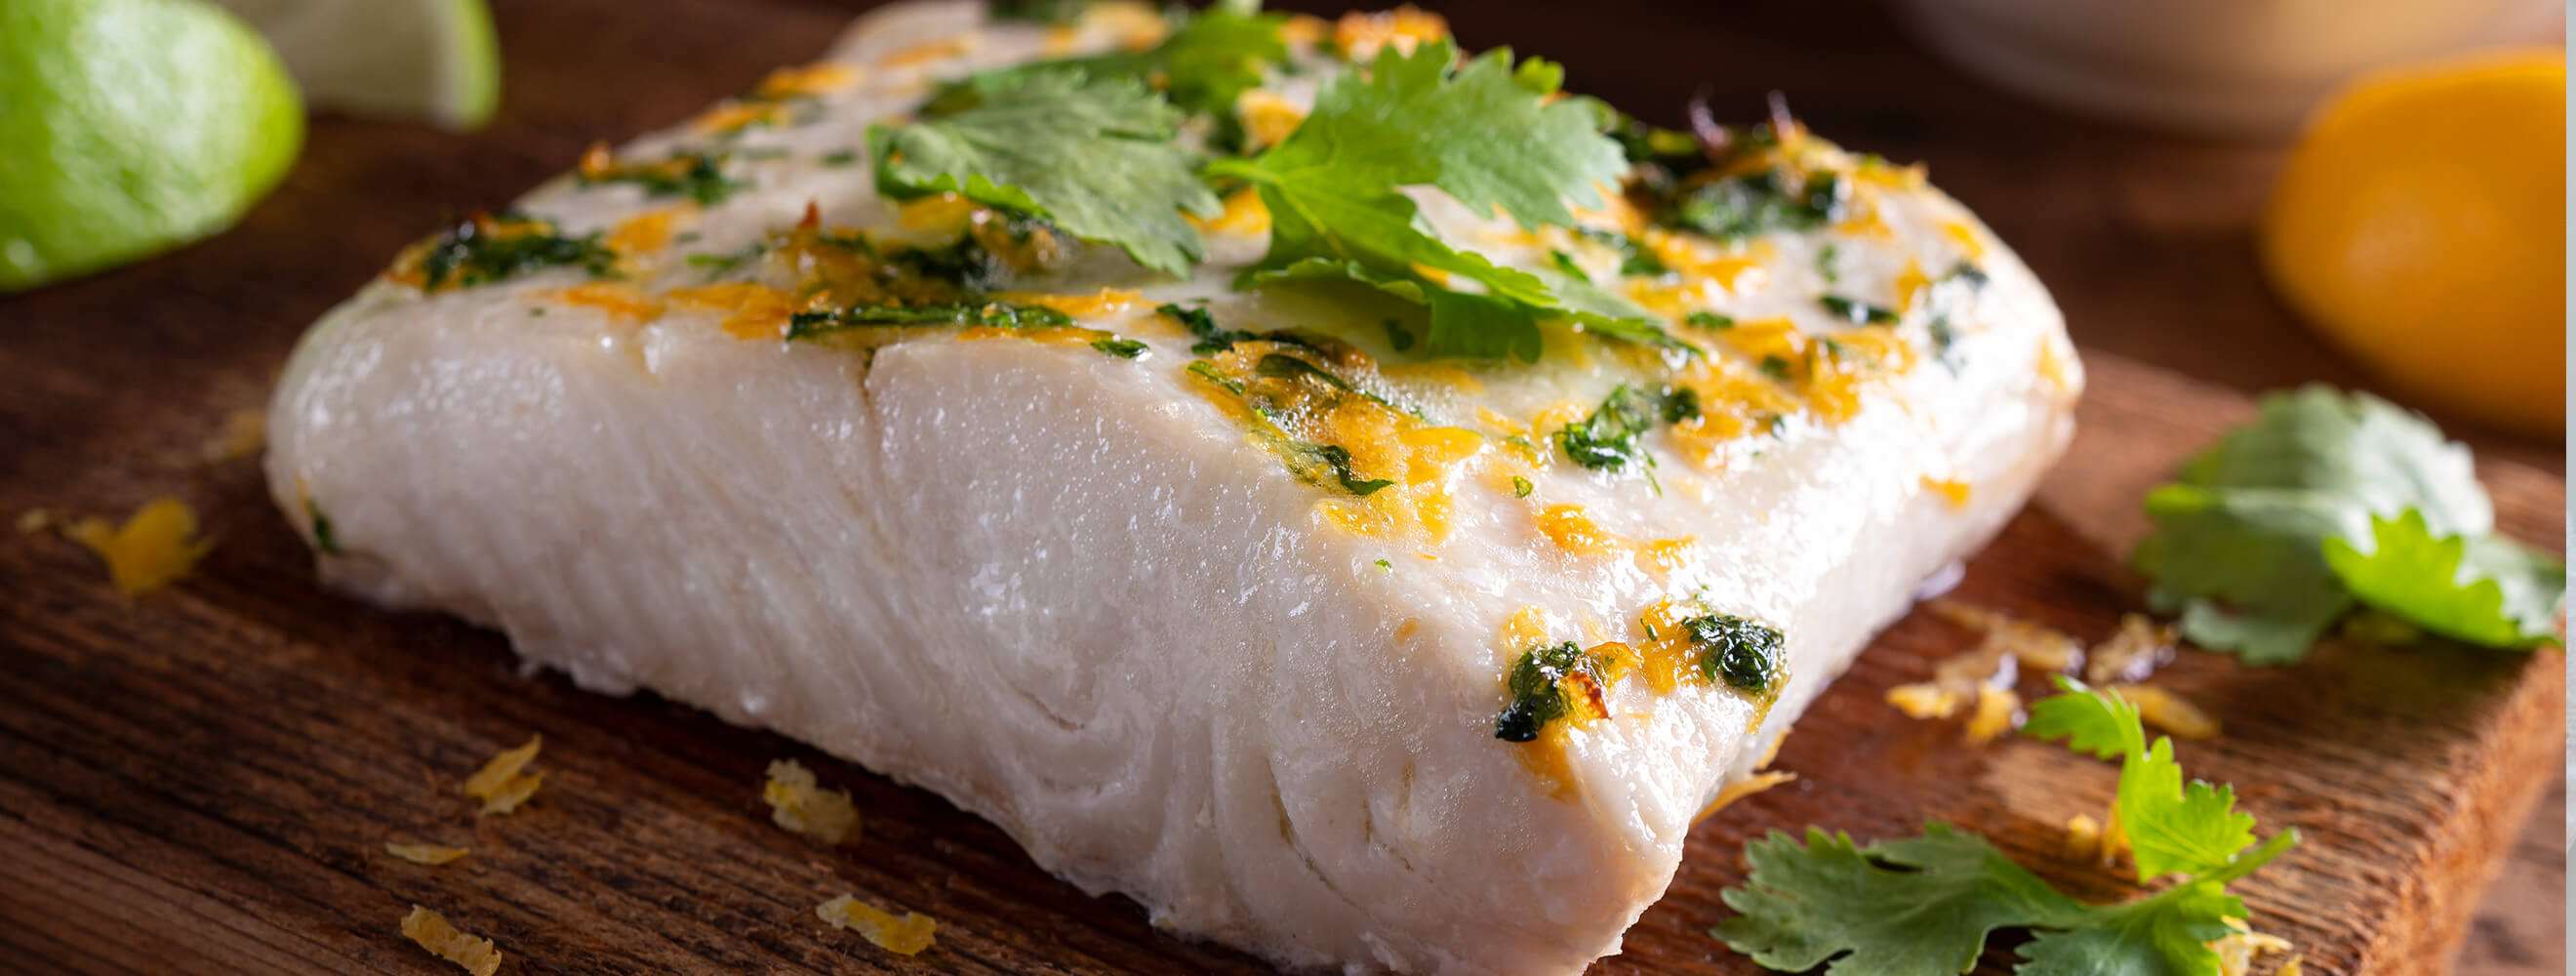 filet of halibut fish on a cutting board topped with seasonings